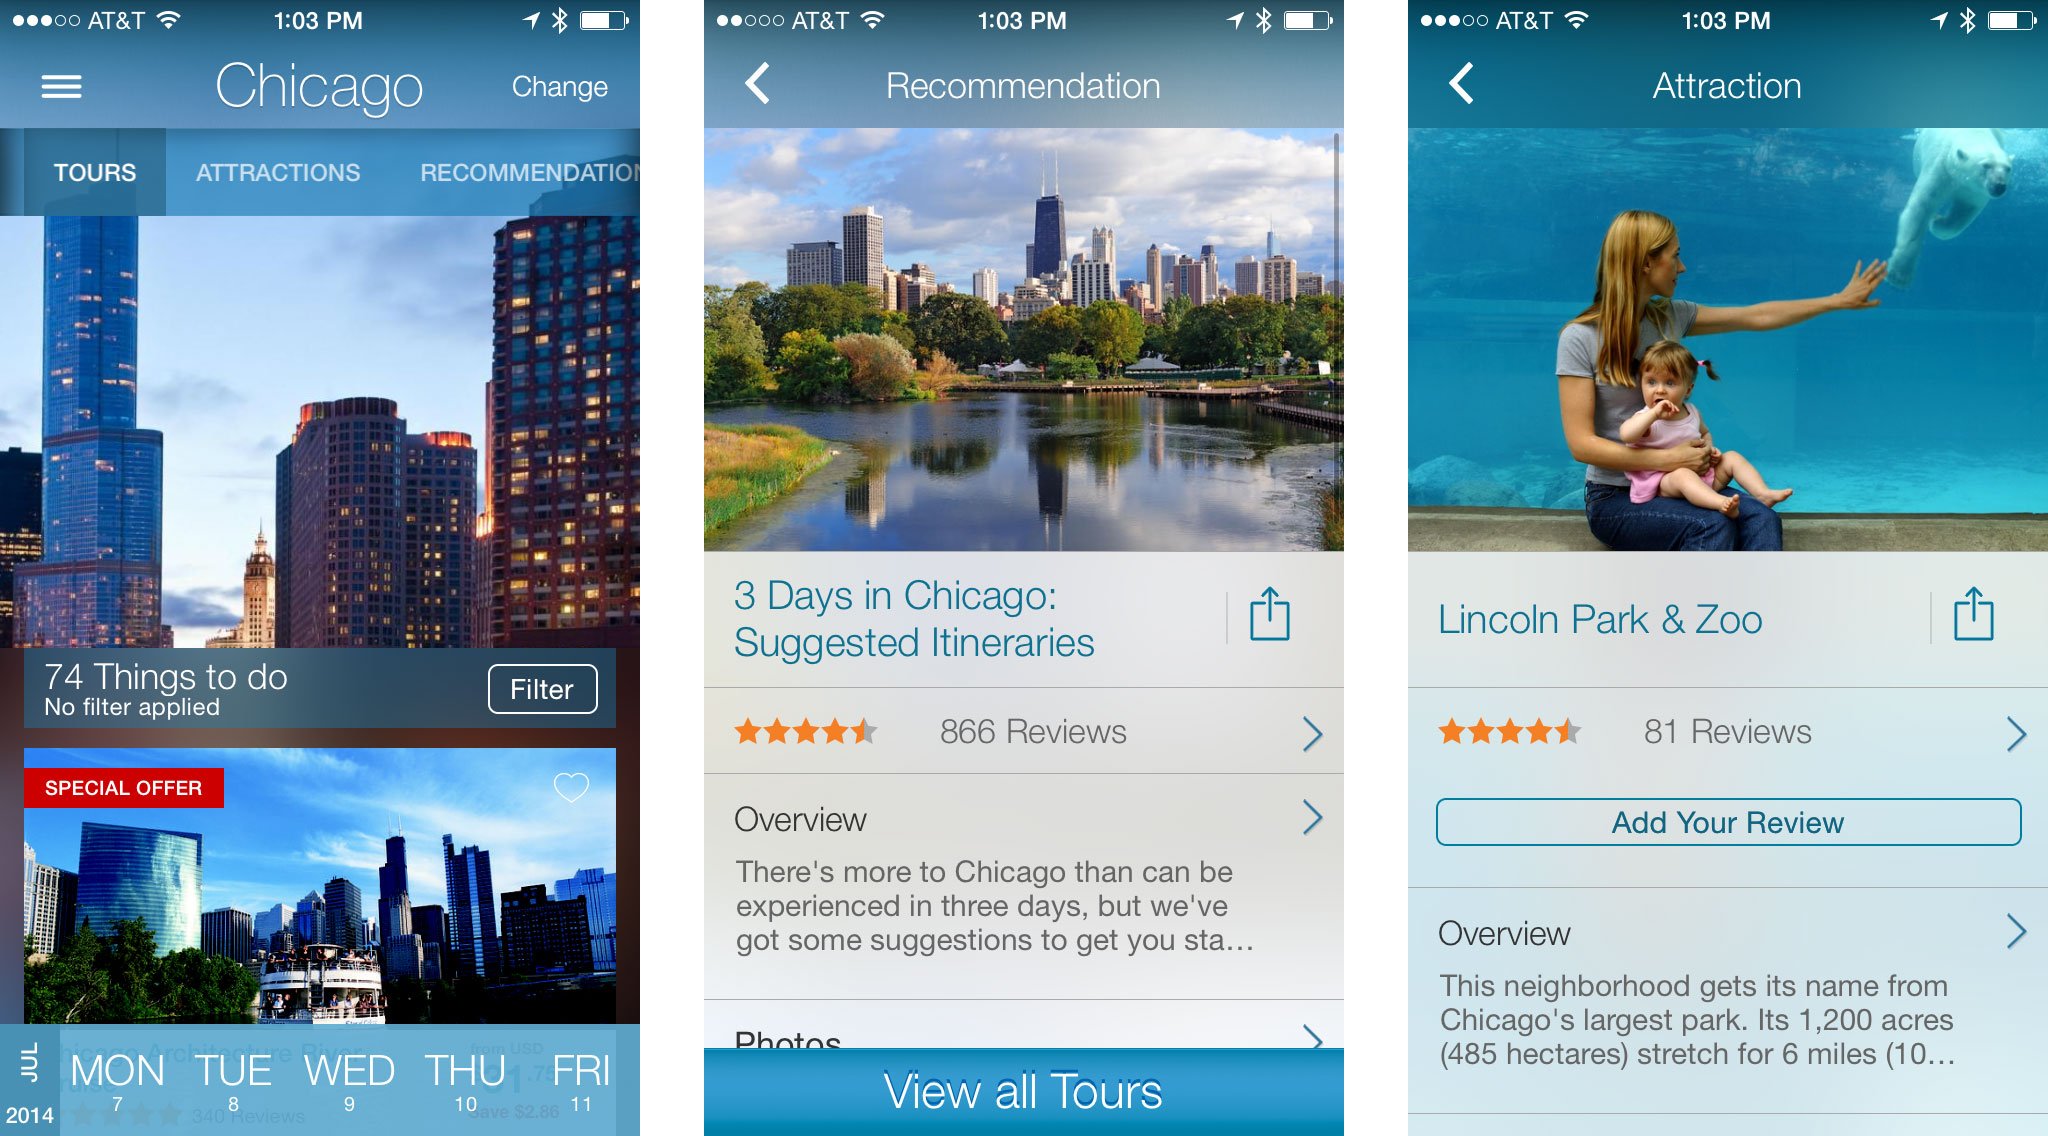 Best travel guide apps for iPhone: Viator